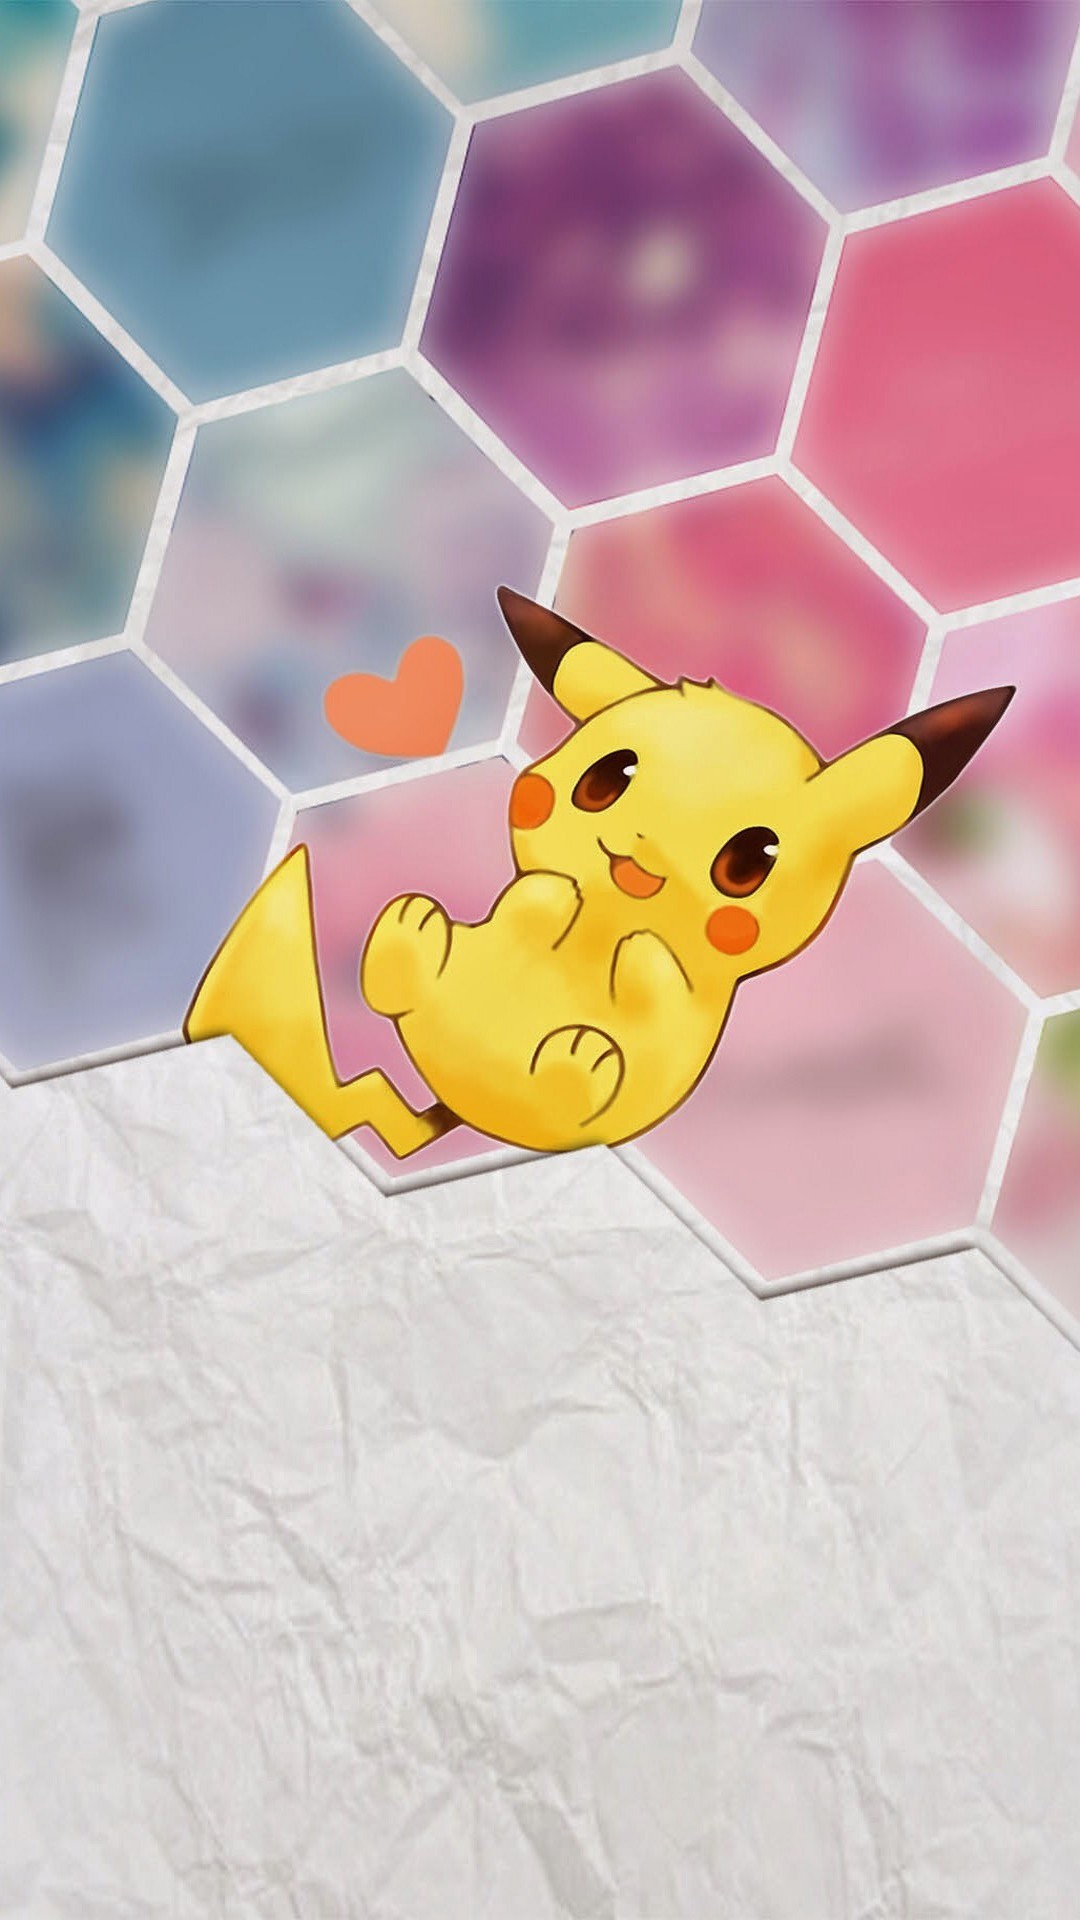 Tap image for more iPhone 6 Plus Pikachu wallpapers Pikachu – mobile9 Cute